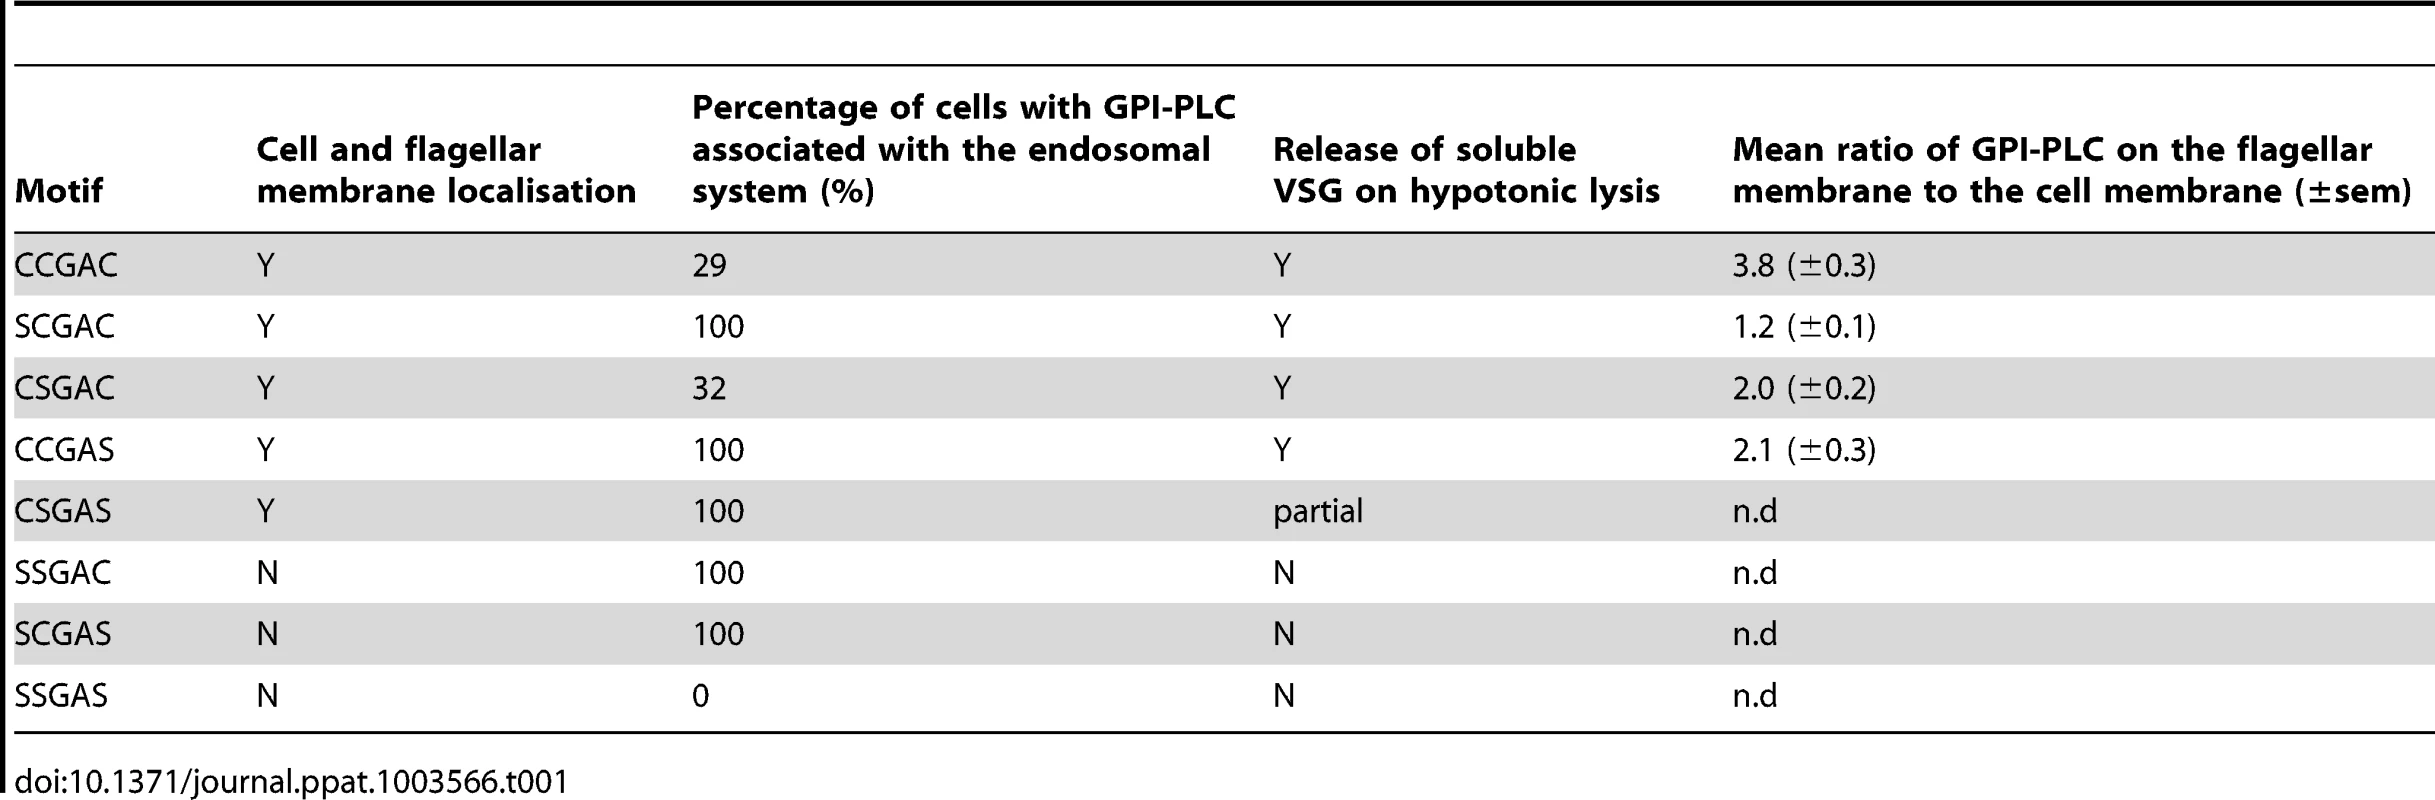 Summary of subcellular localisation and GPI-anchor hydrolysis for wild type and mutant GPI-PLC (n.d - no data).